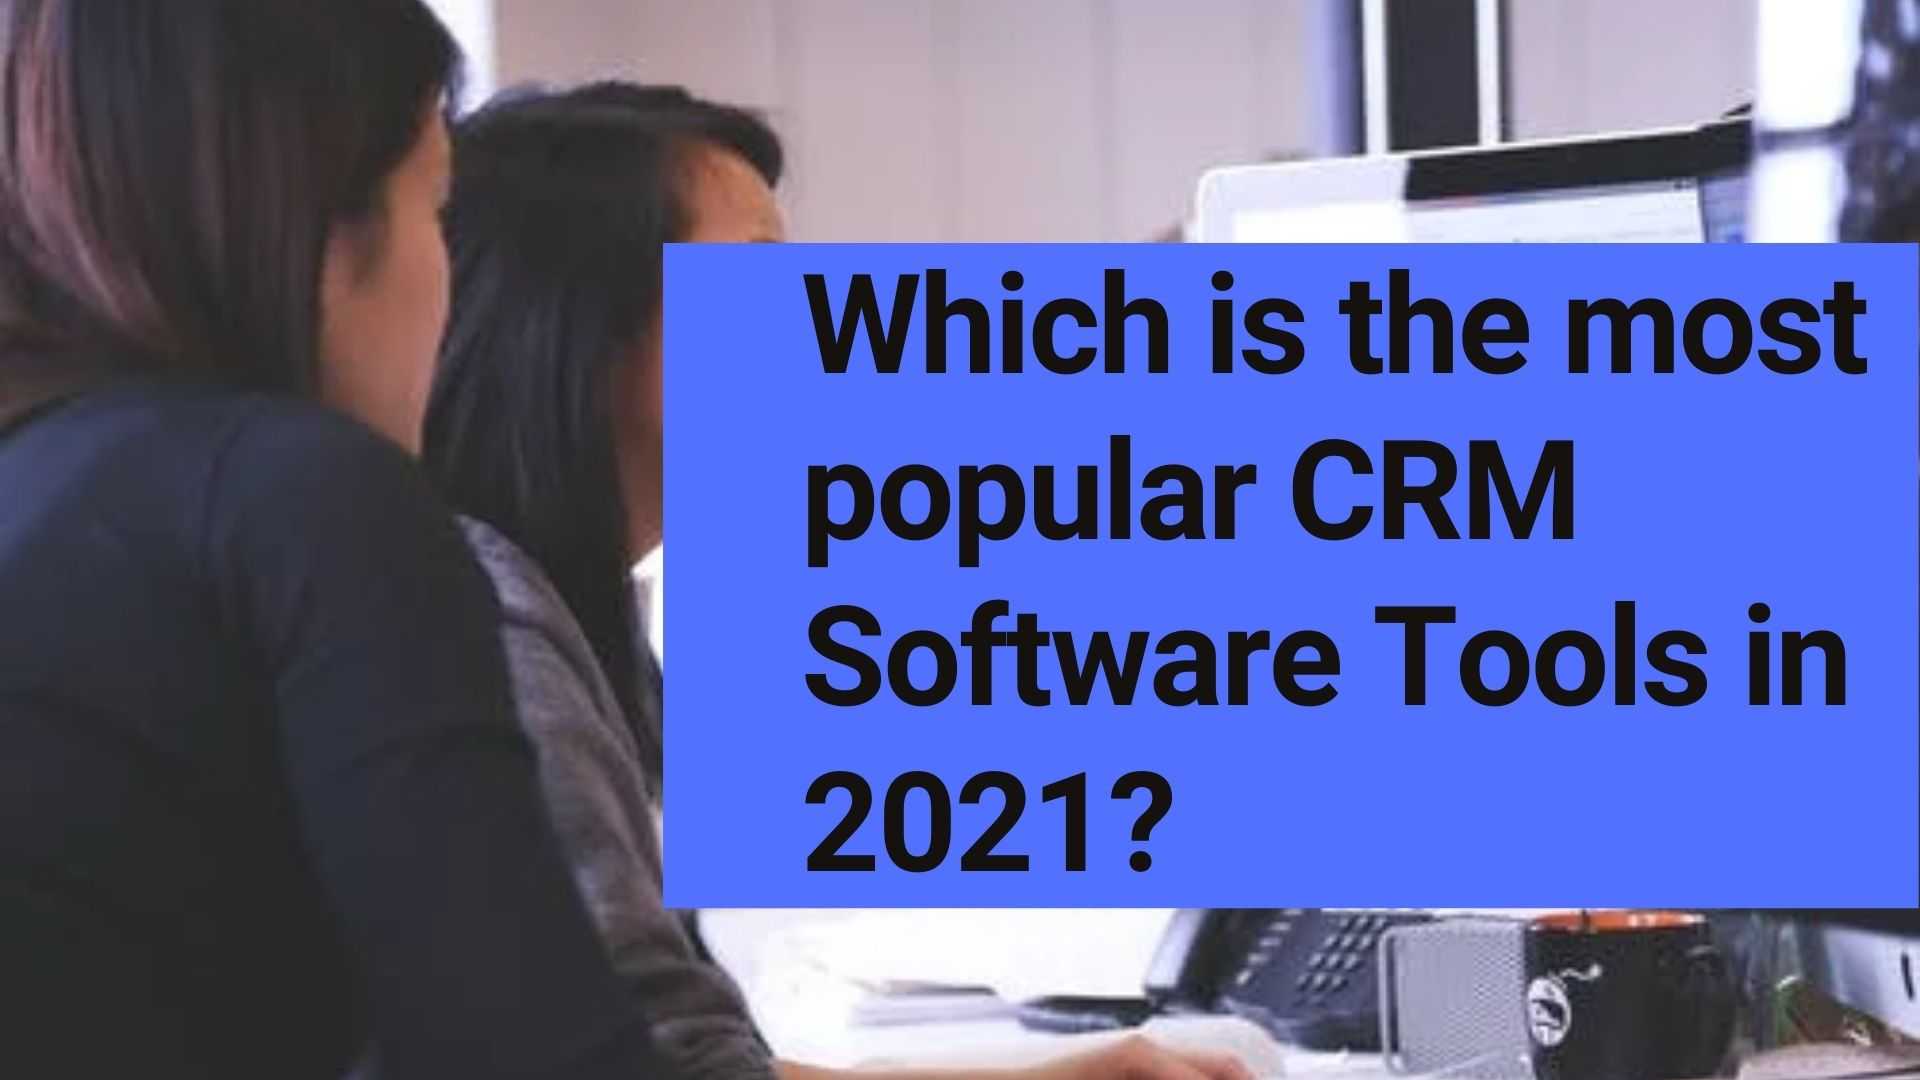 The most popular CRM Software Tools in 2021